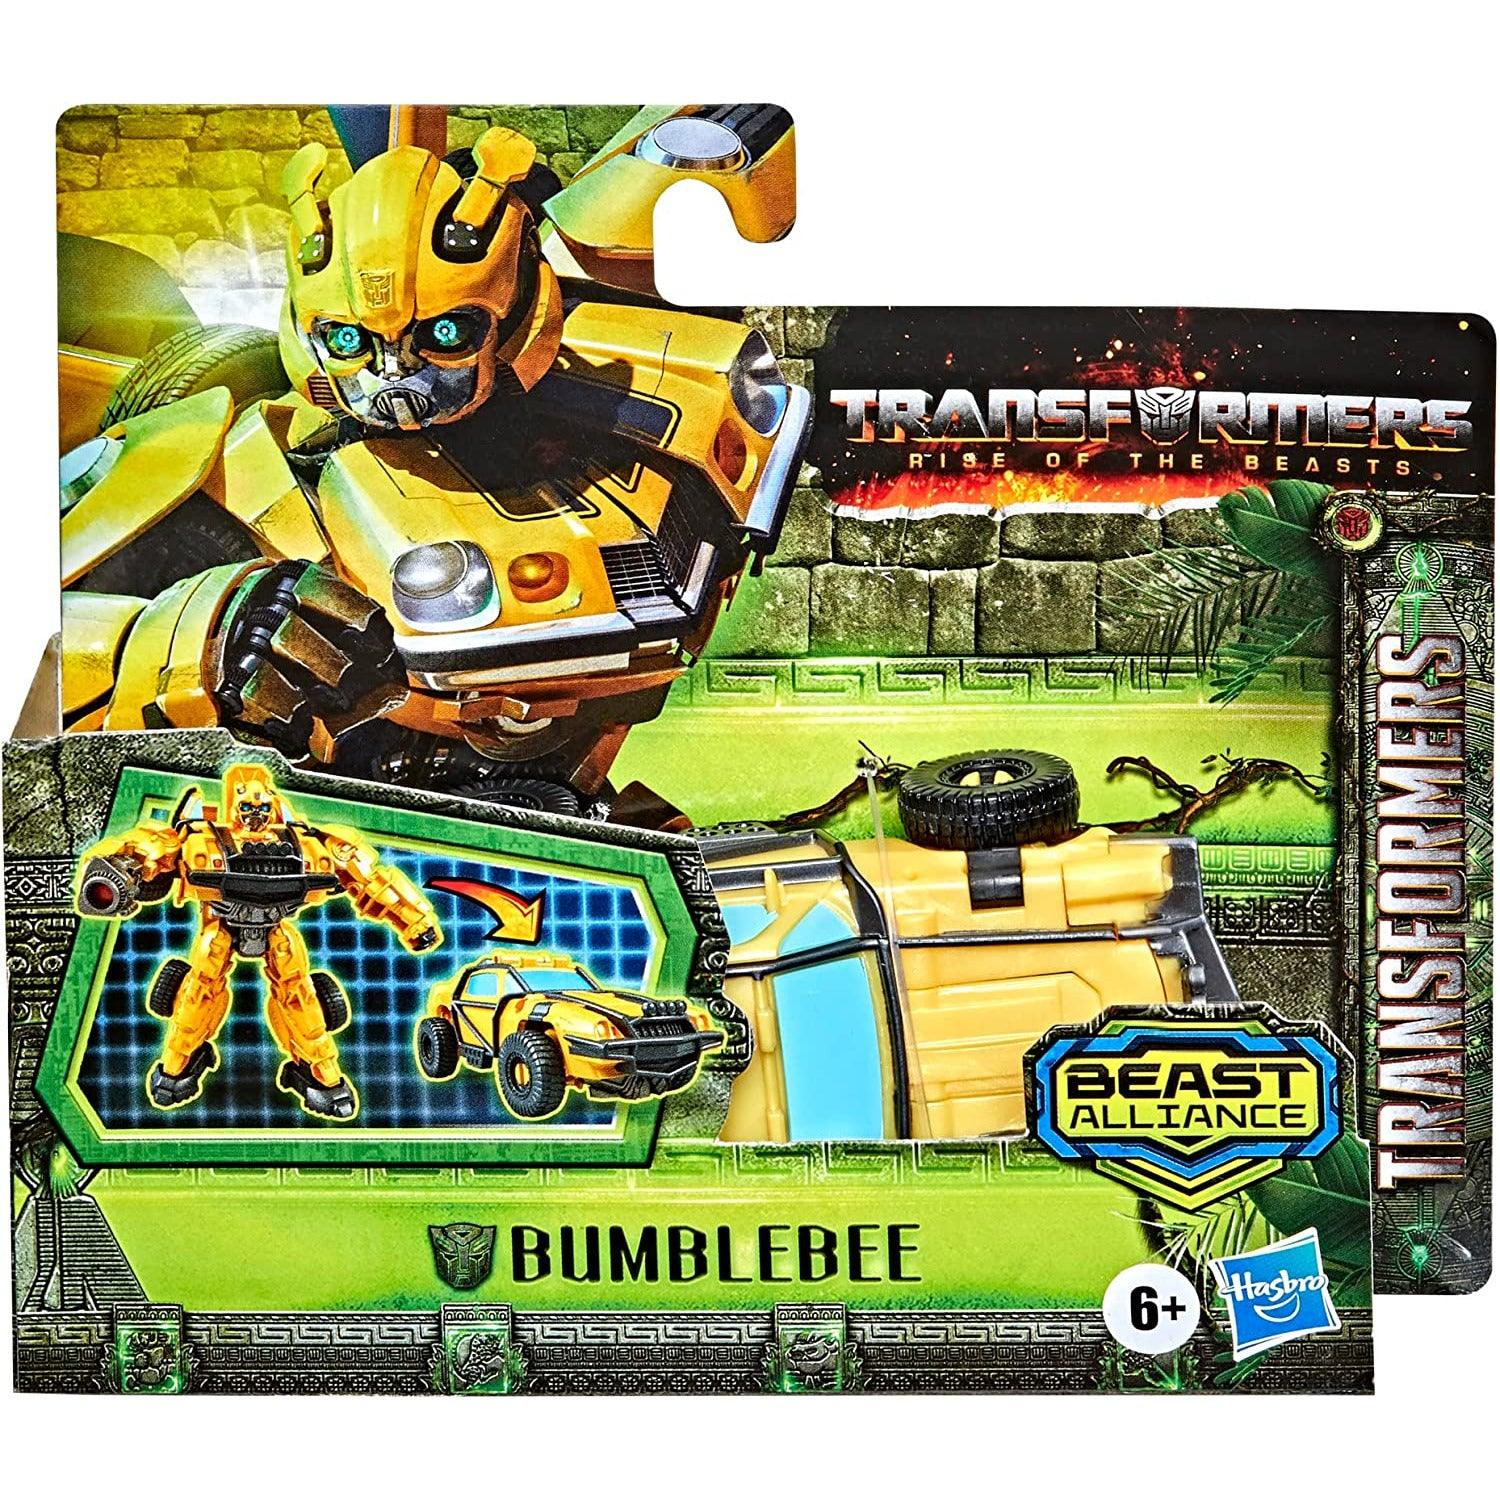 Transformers Toys Rise of The Beasts Movie Beast Alliance Battle Changers Bumblebee Action Figure - BumbleToys - 5-7 Years, Boys, Figures, Pre-Order, Transformers